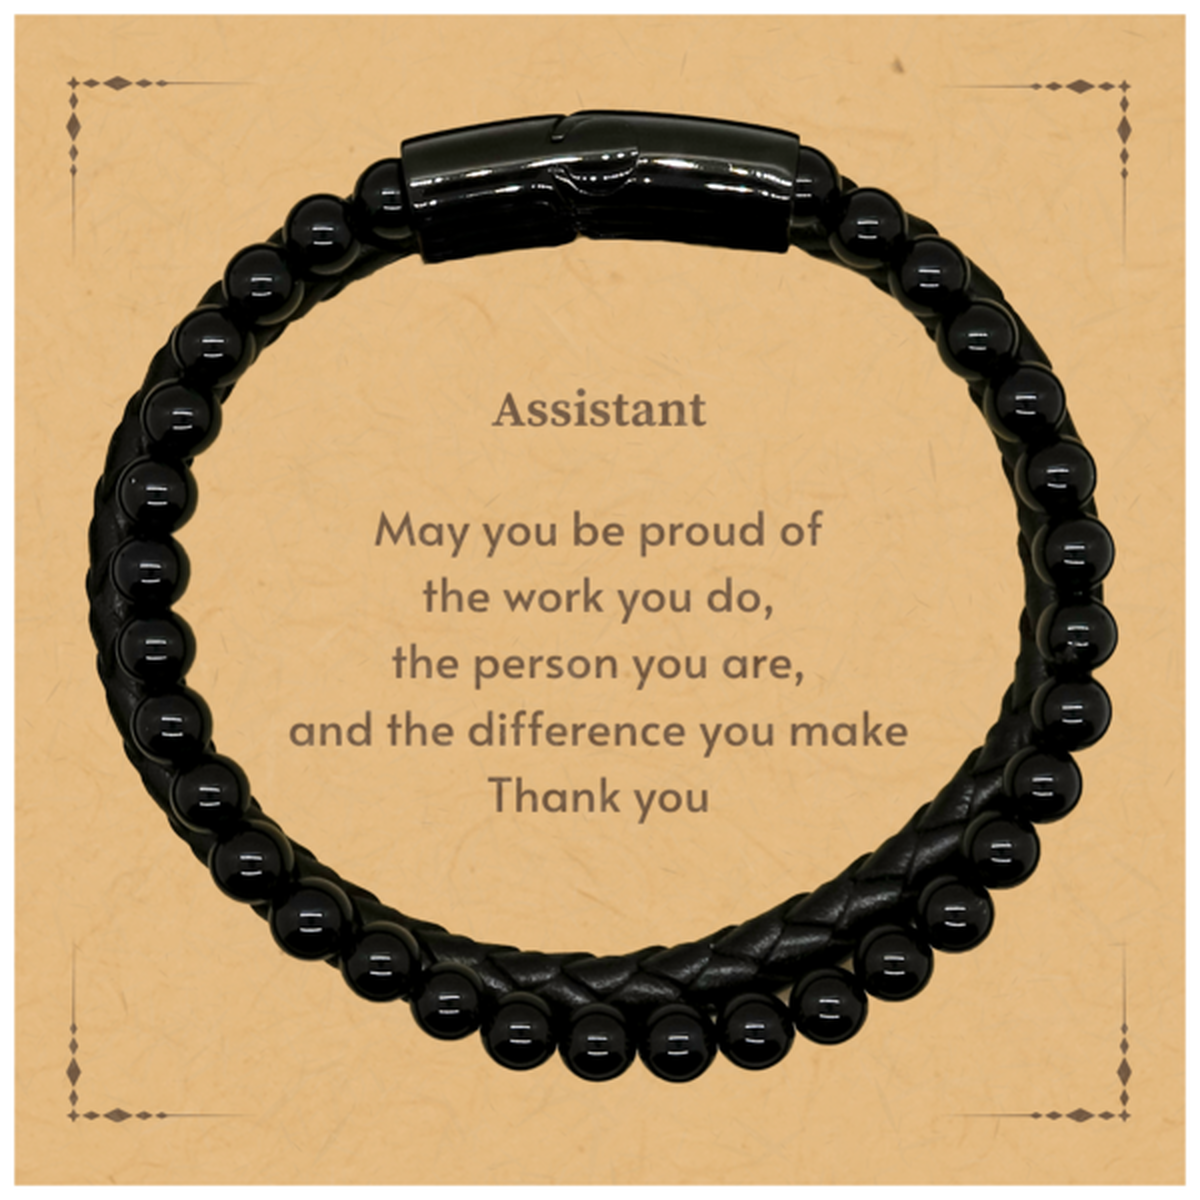 Heartwarming Stone Leather Bracelets Retirement Coworkers Gifts for Assistant, Assistant May You be proud of the work you do, the person you are Gifts for Boss Men Women Friends